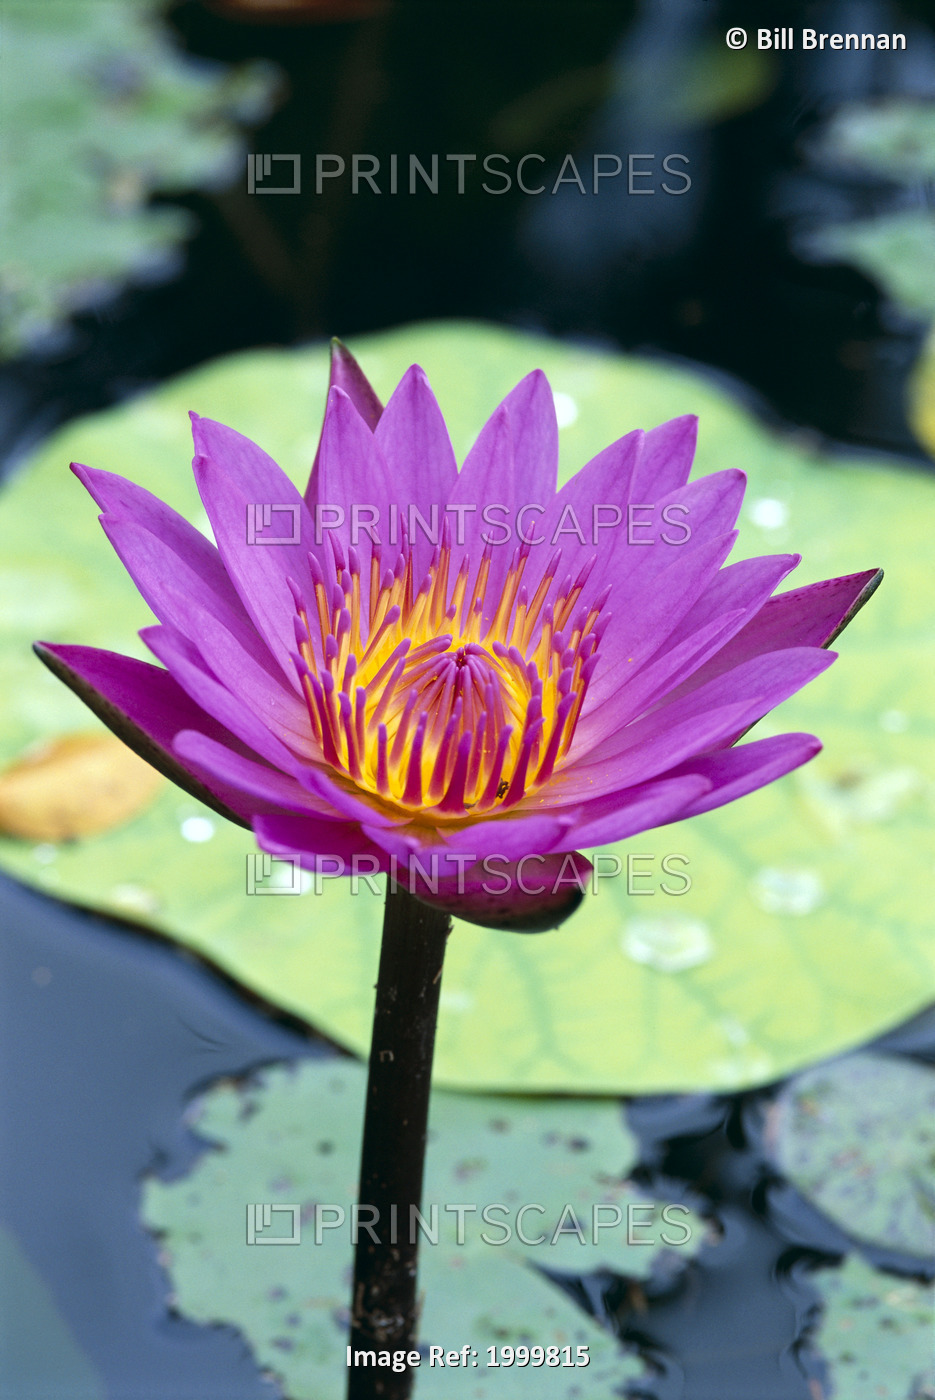 Single Water Lily Blossom On Plant, Lily Pad With Water Droplets Atop C1655